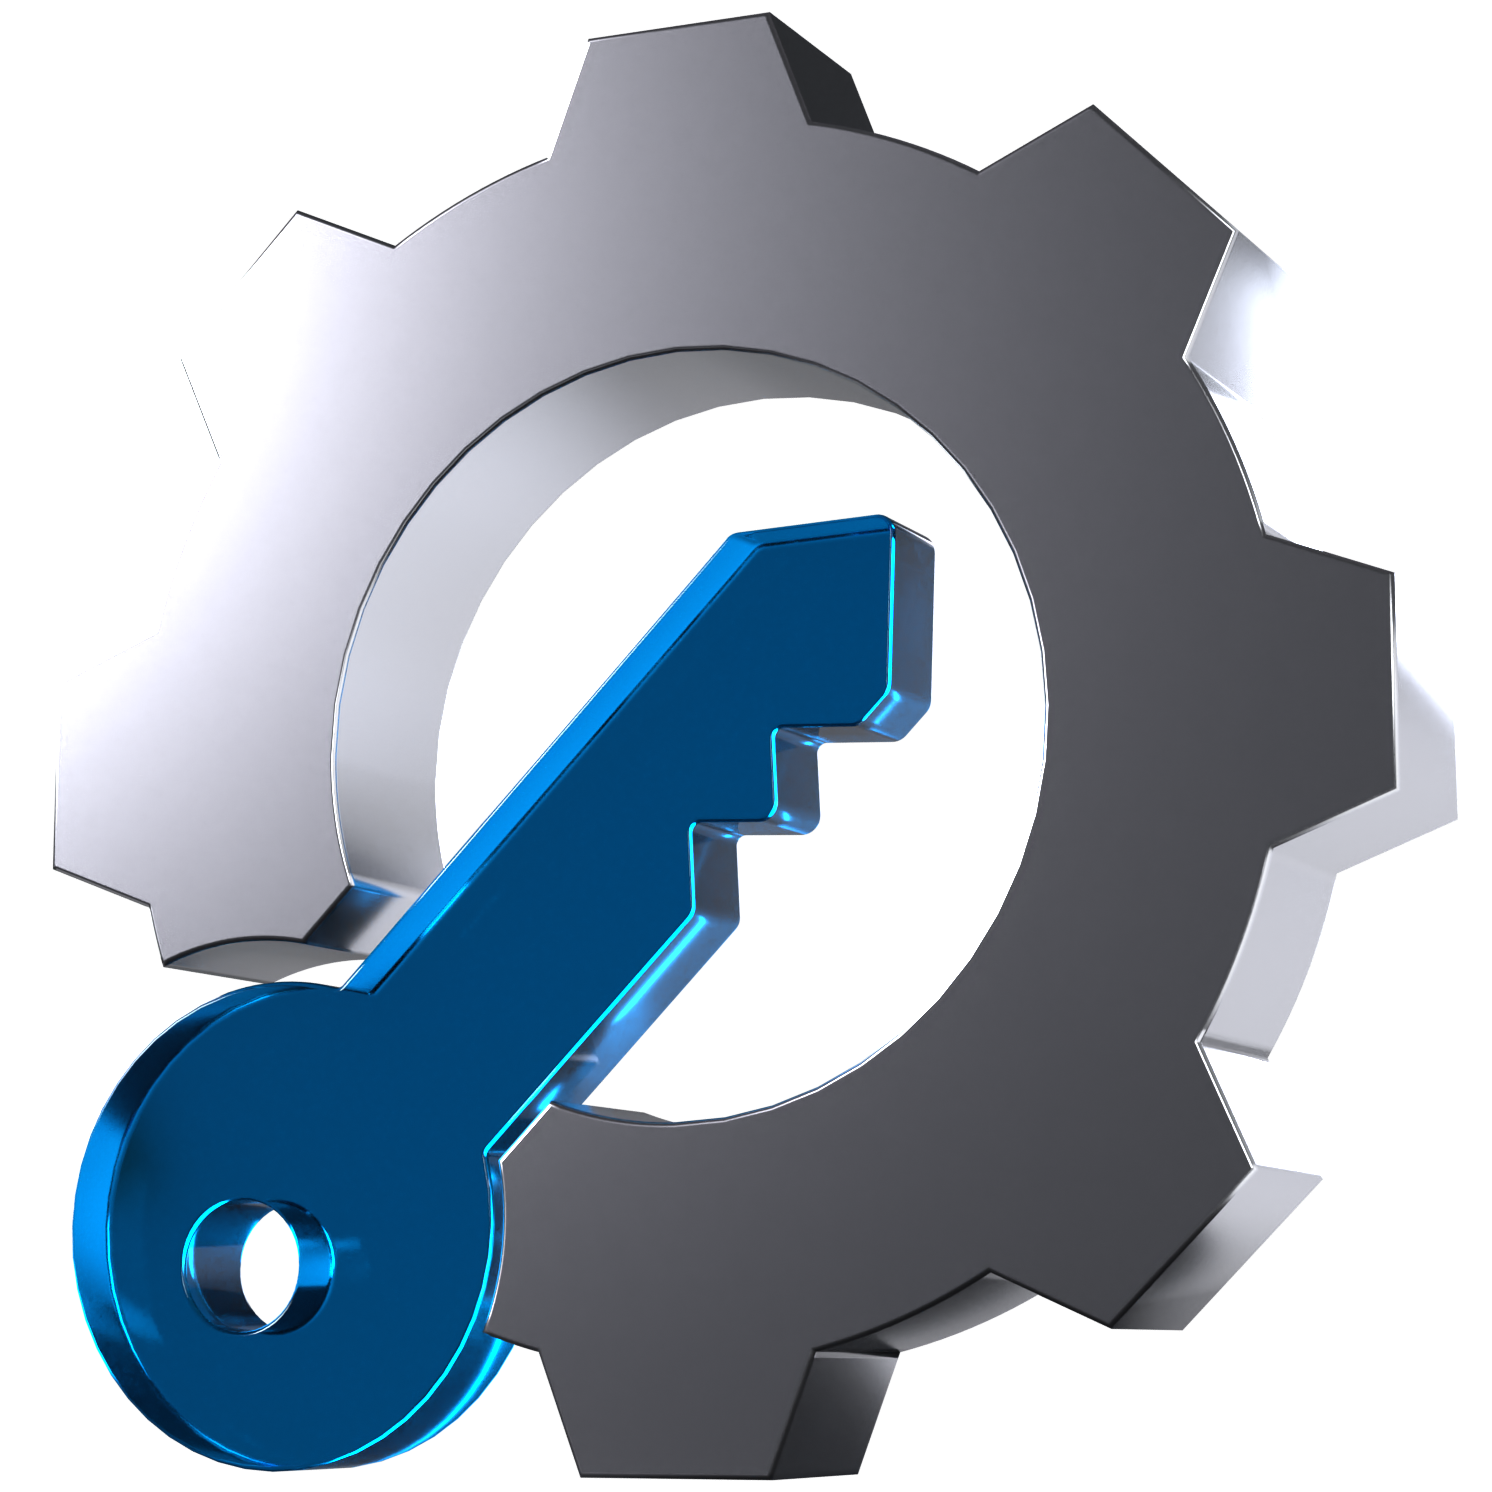 A 3D icon of a gear with a key in the middle